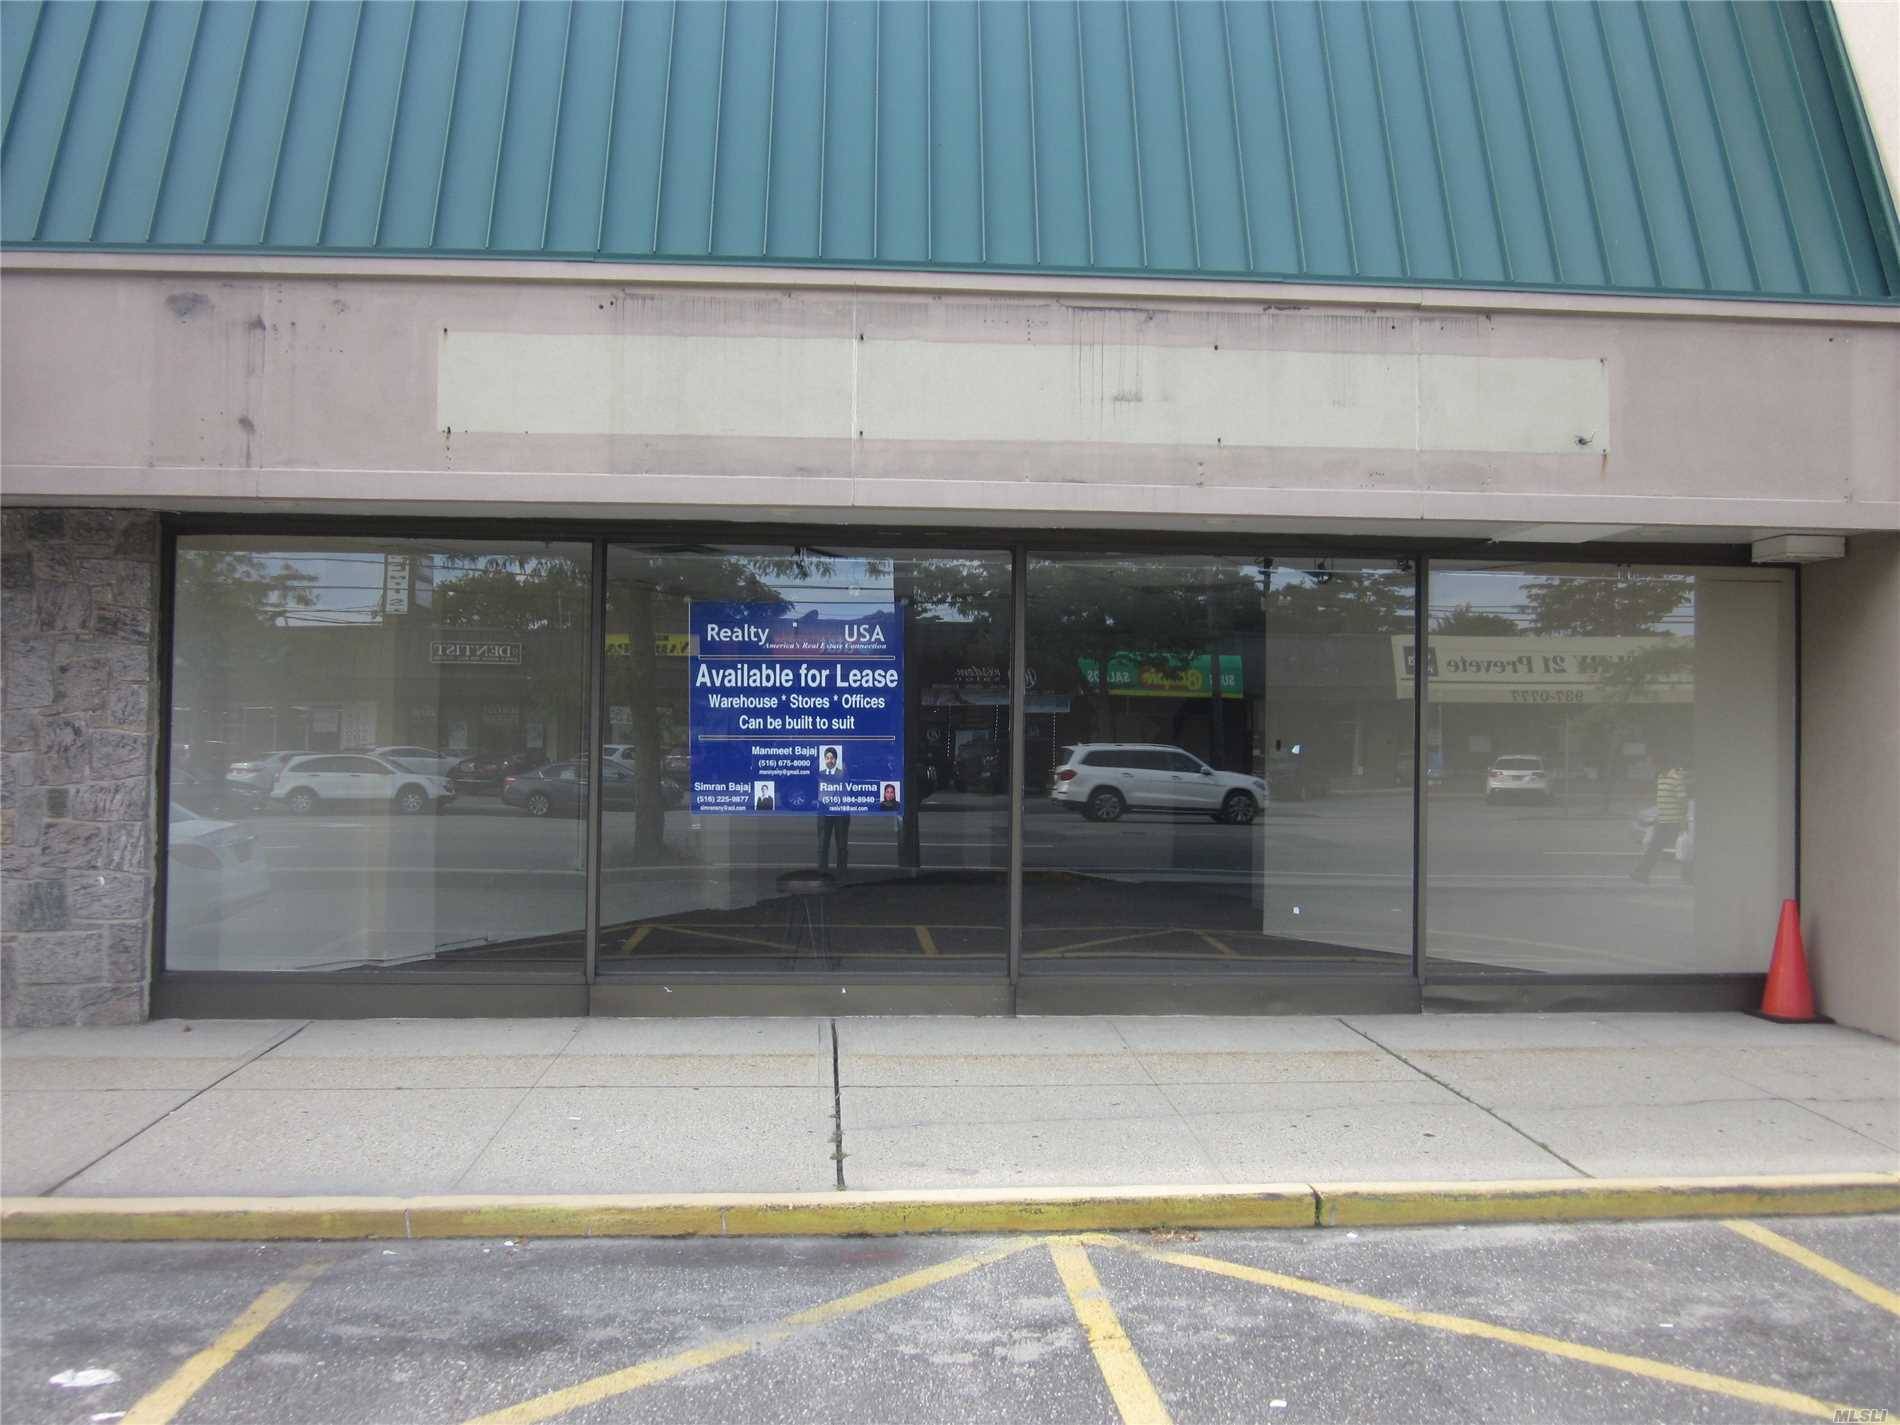 Amazing Retail/Office Location On Prime Old Country Road Next To Antun's Banquet Hall, In The Heart Of Hicksville Business With High Visibility.